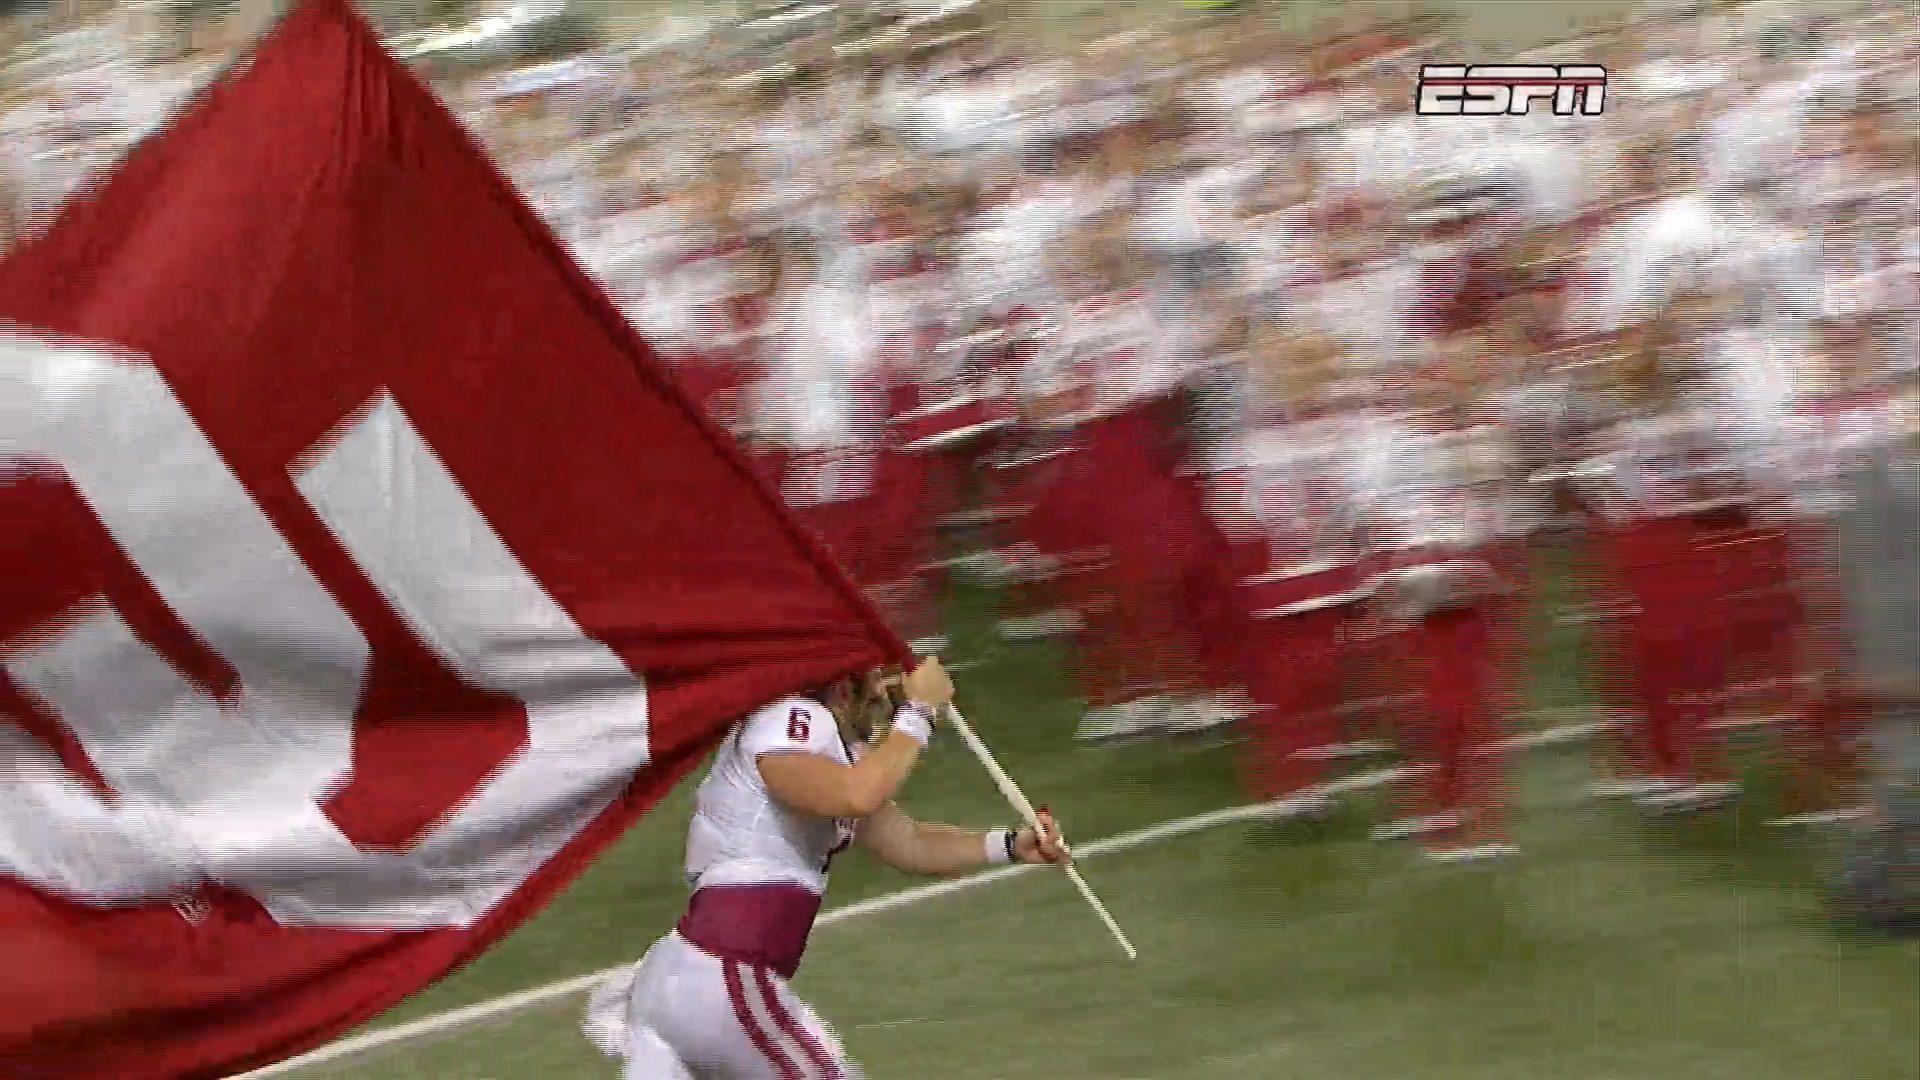 WATCH: Baker Mayfield plants OU flag in the middle of the Buckeye